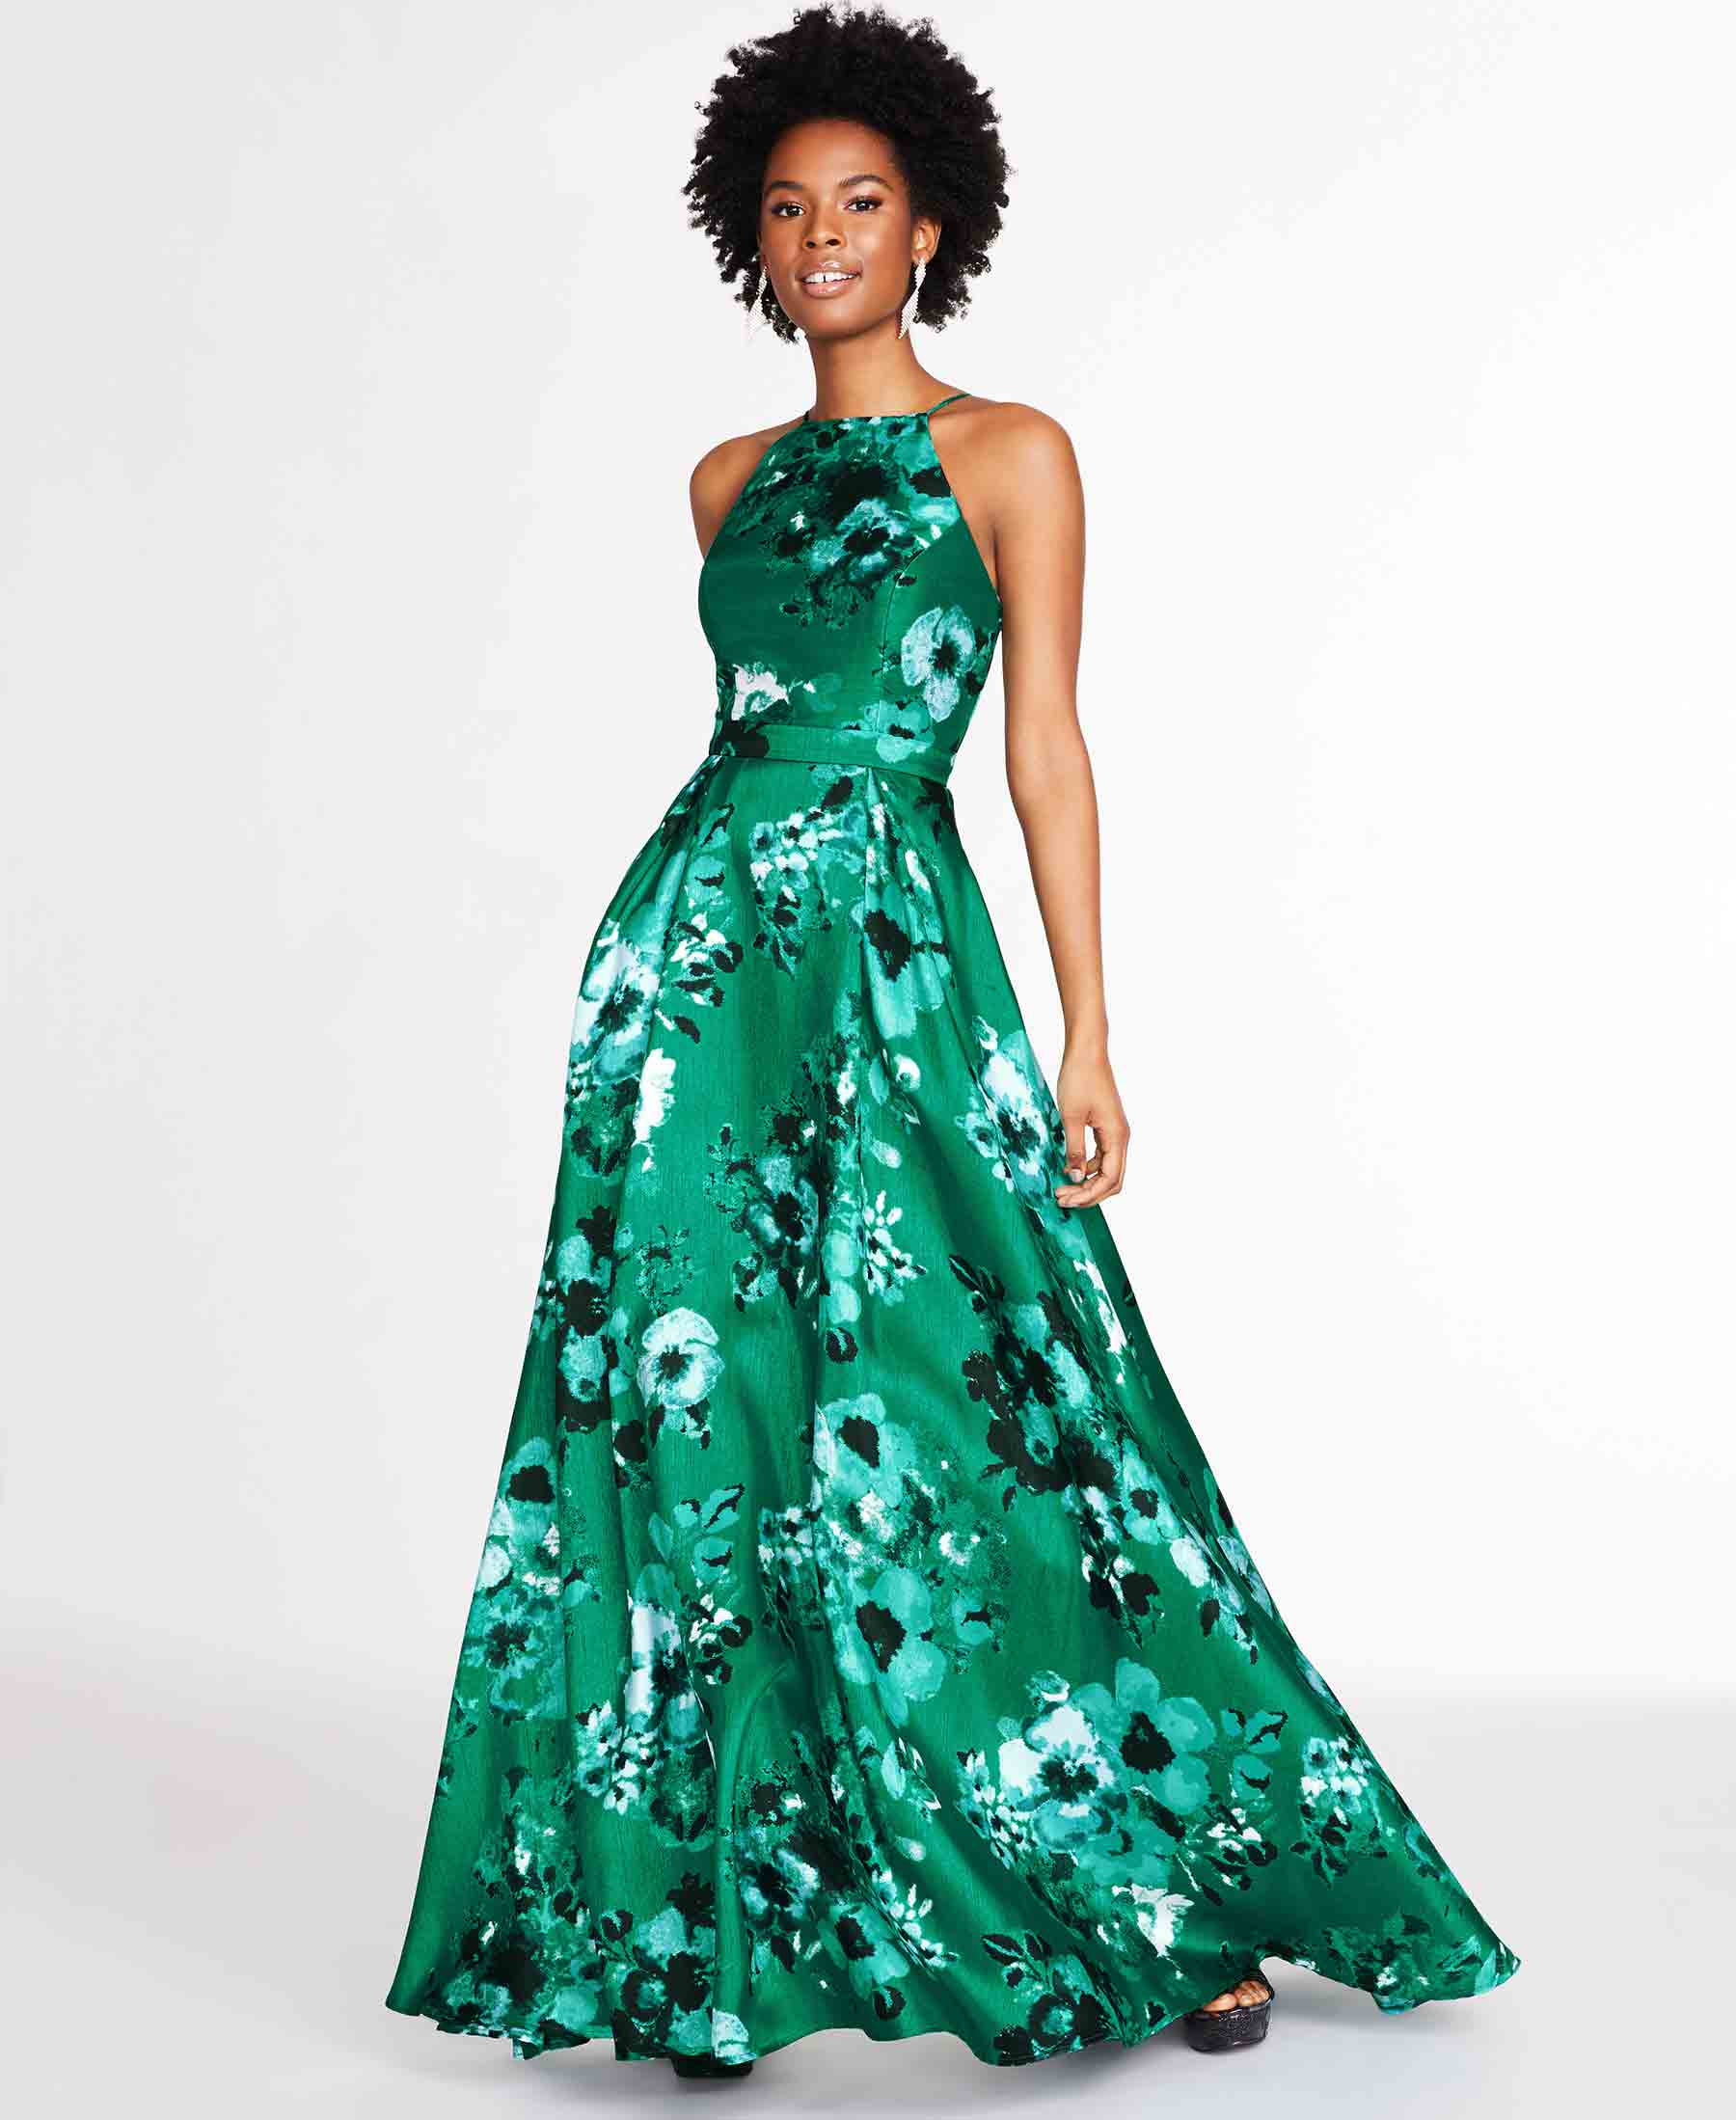 Macy Prom Dress | peacecommission.kdsg.gov.ng